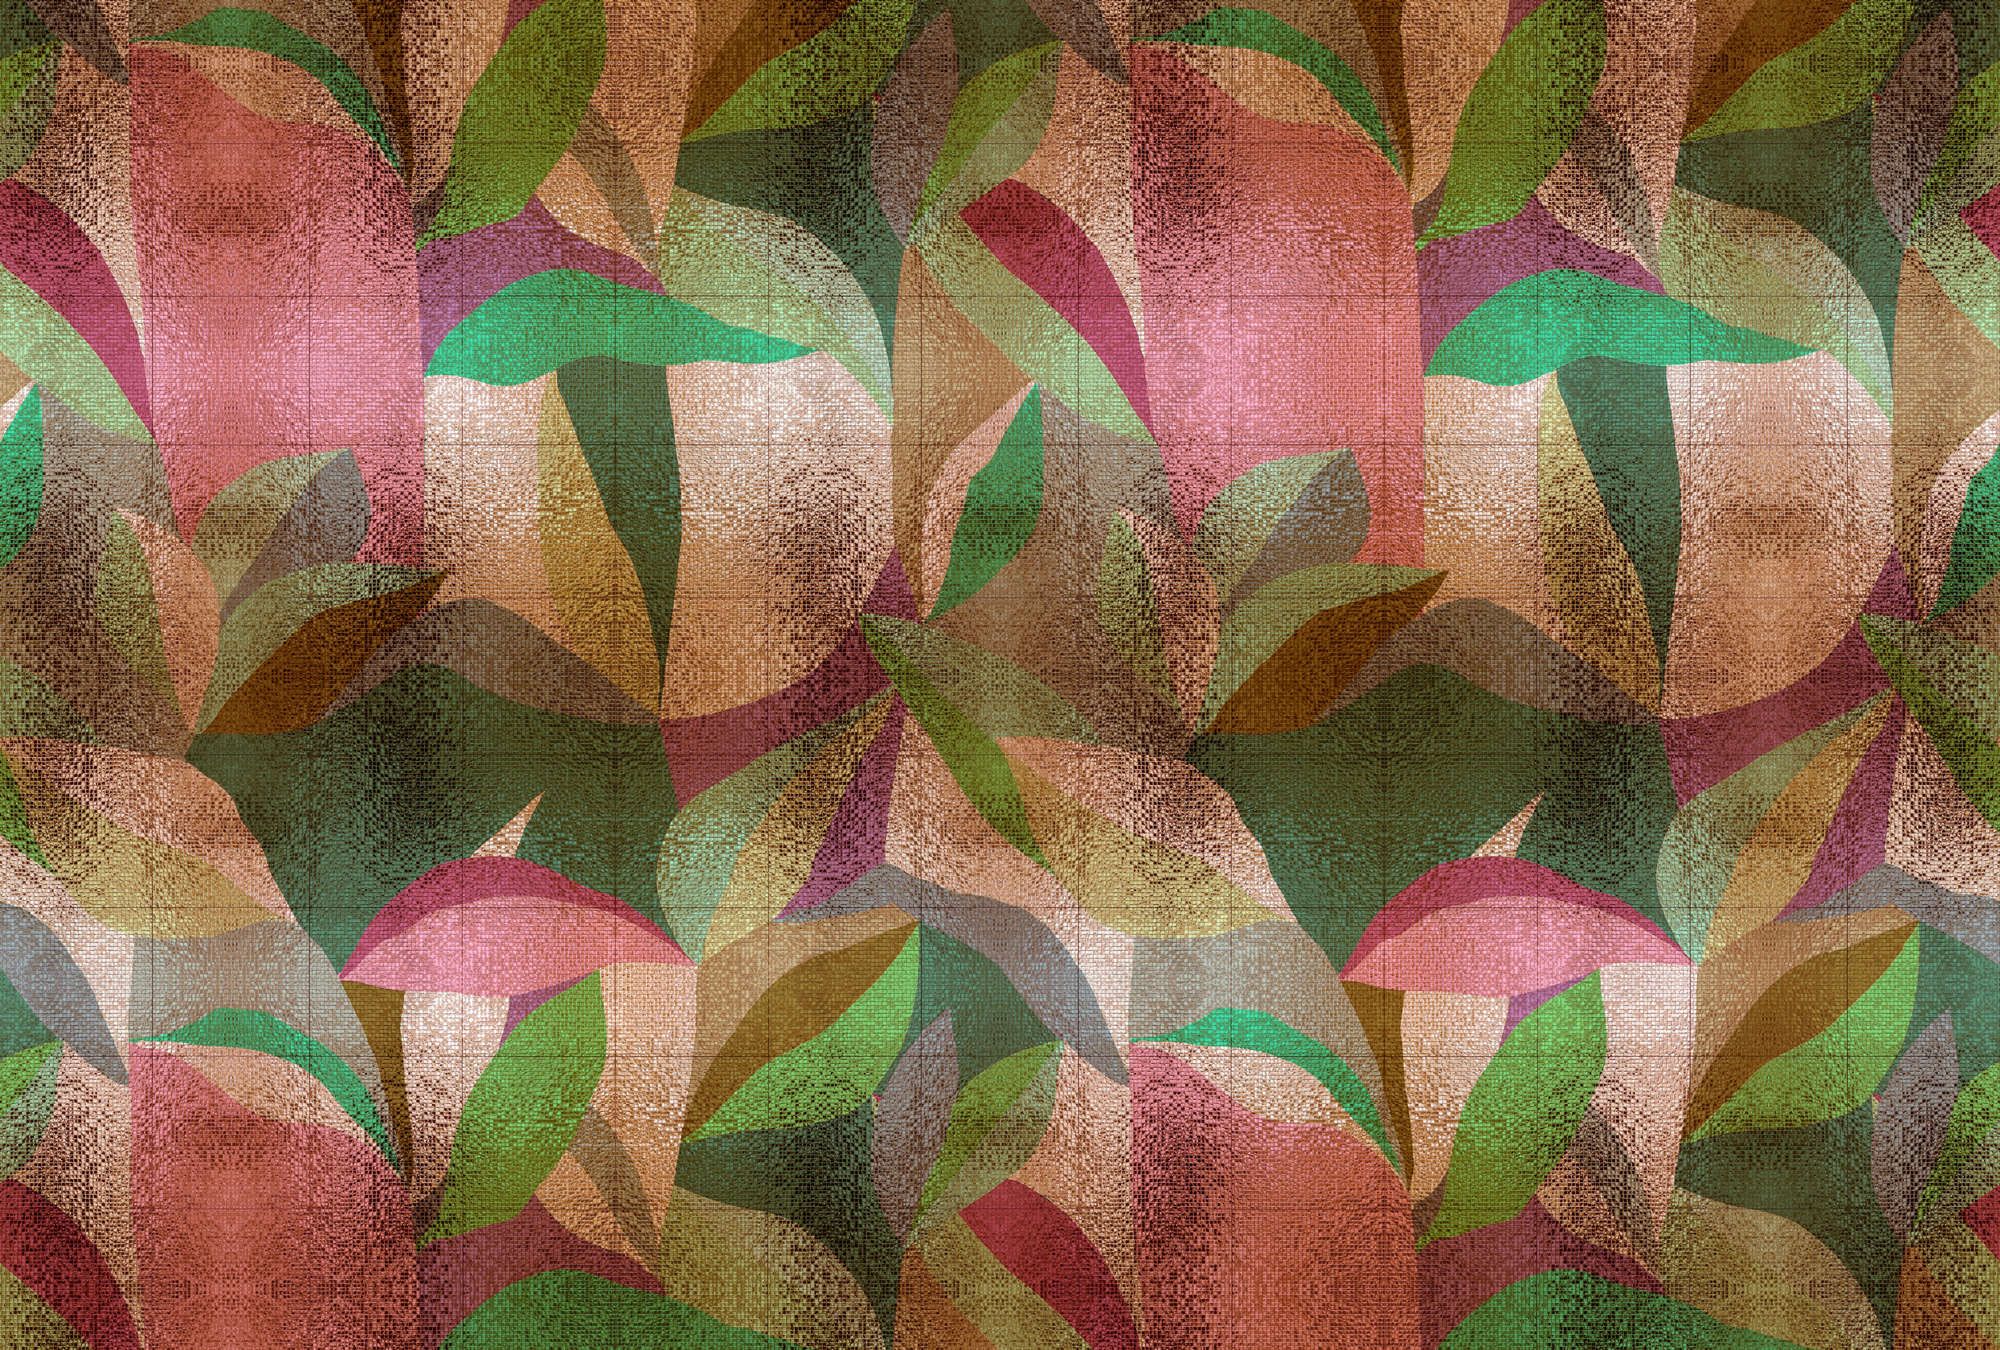             Photo wallpaper »grandezza« - Abstract colourful leaf design with mosaic structure - Lightly textured non-woven fabric
        